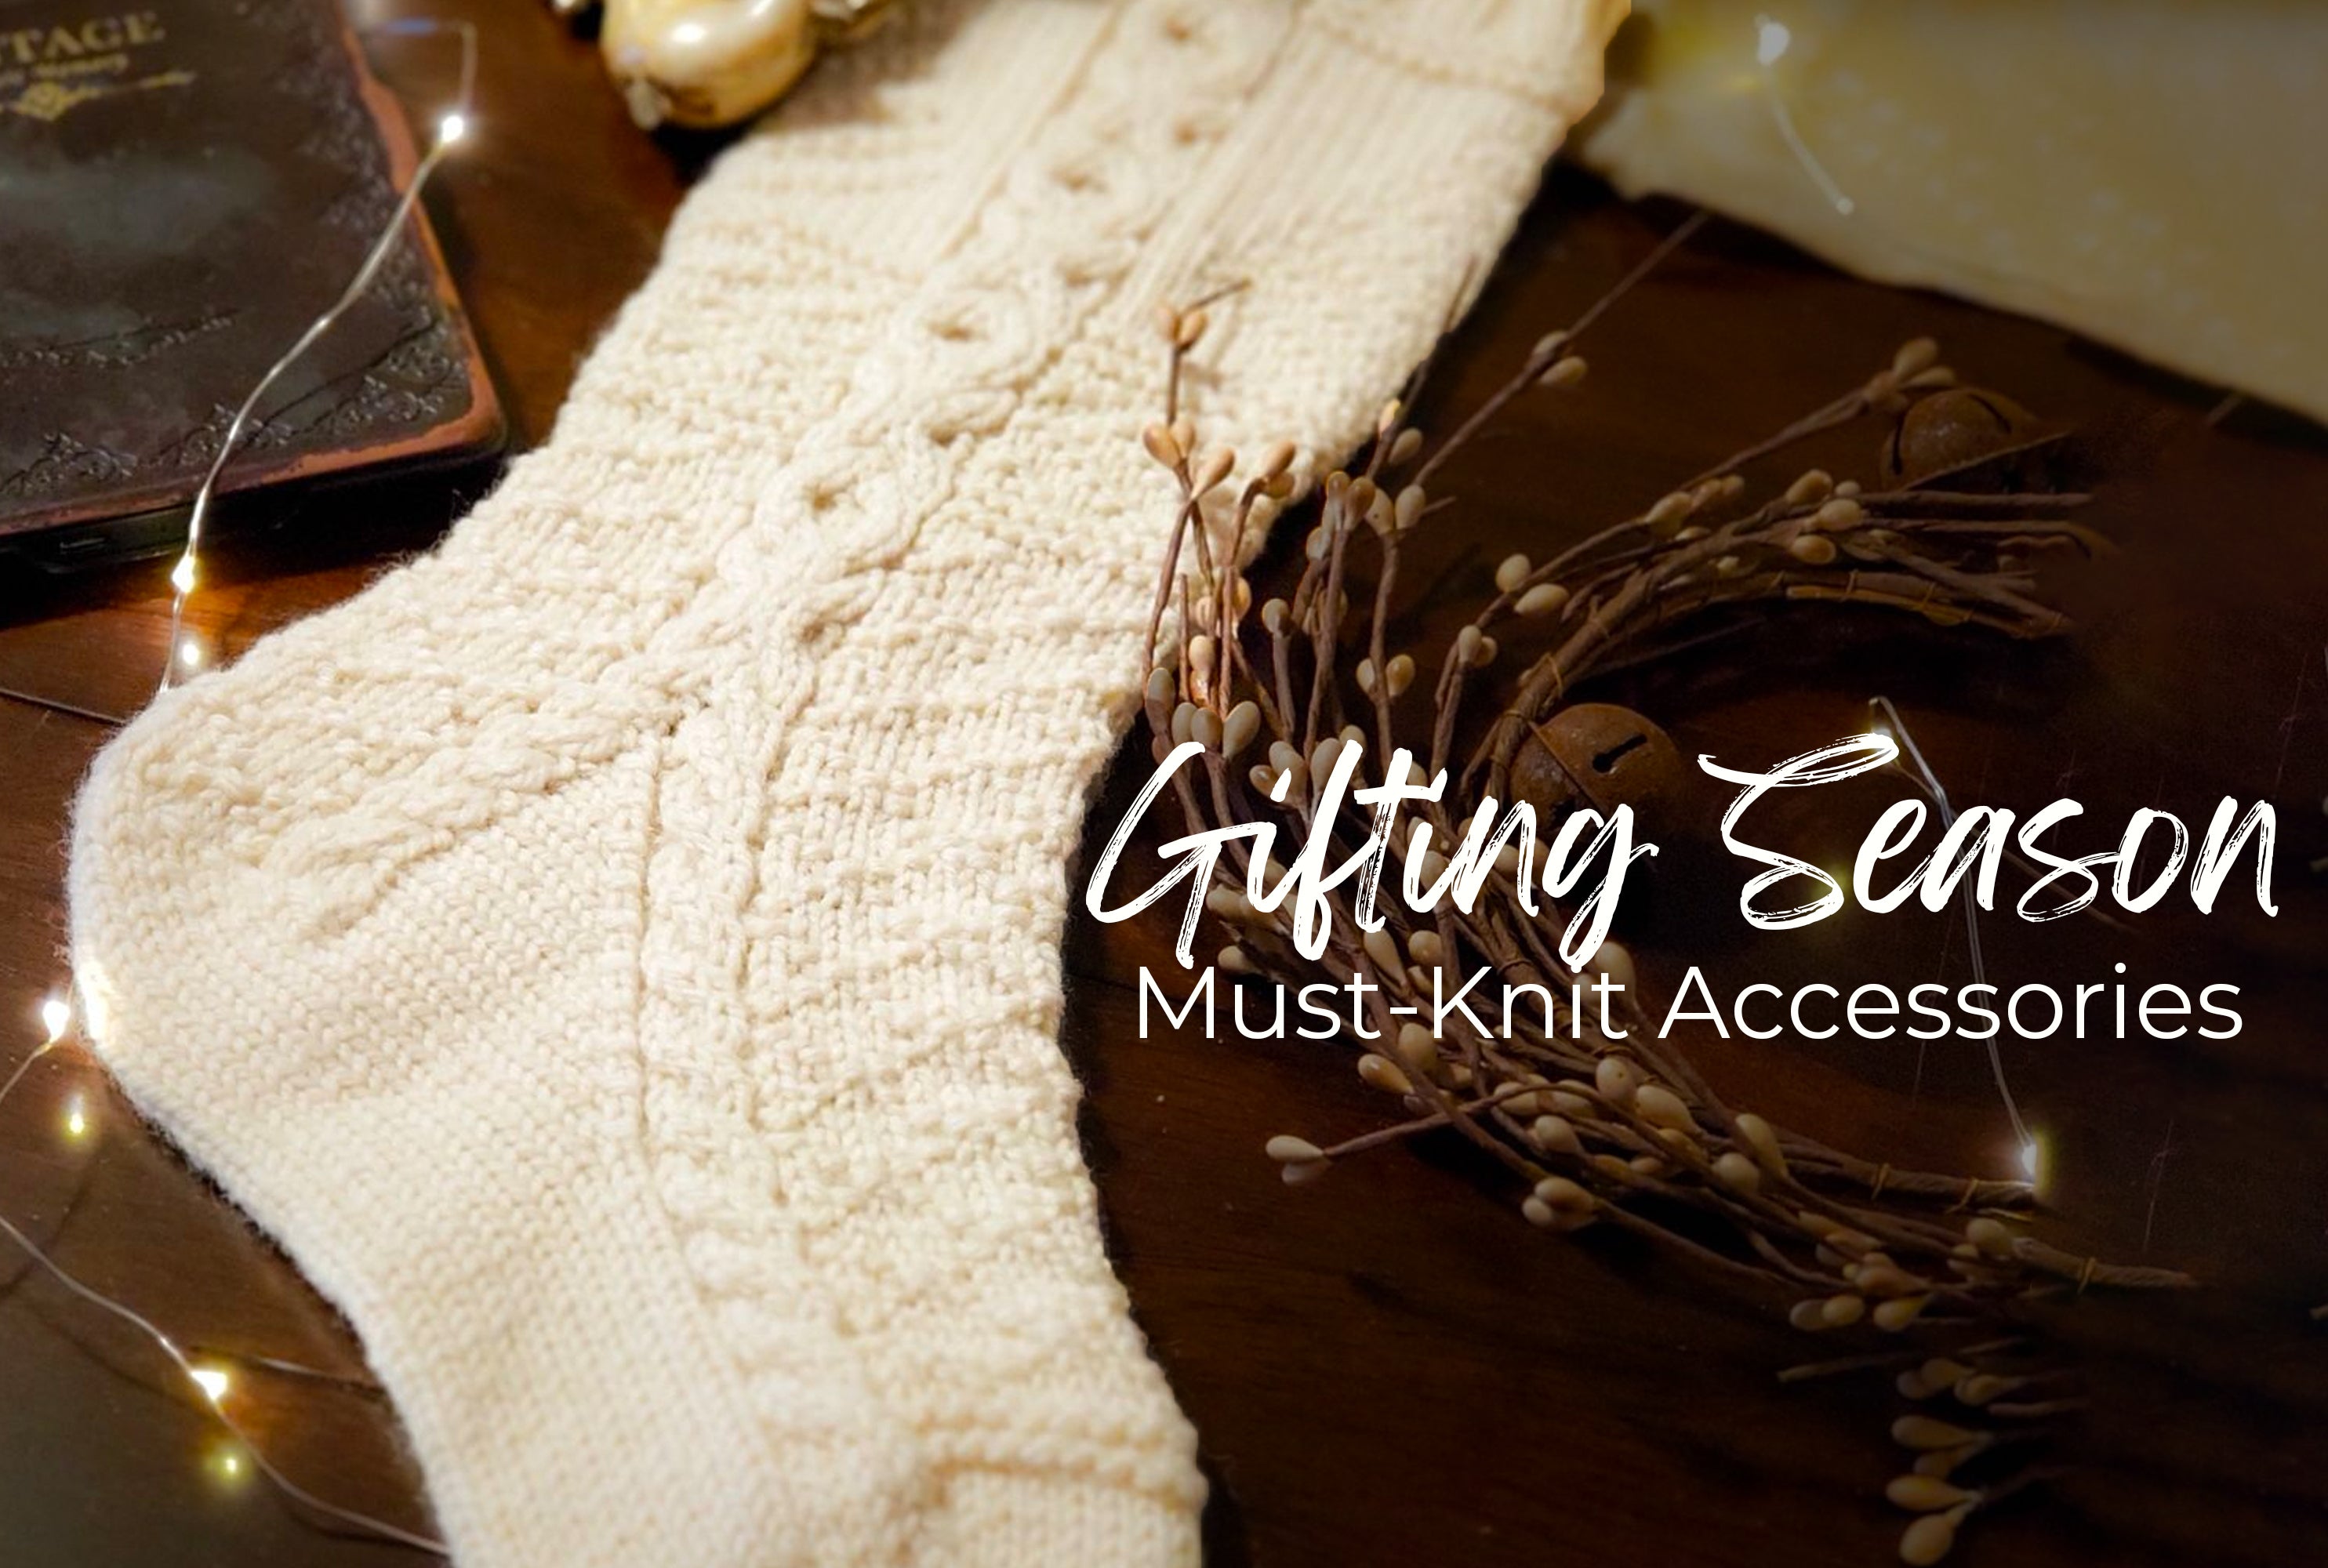 Get Ready for the Gifting Season with Must-Knit Accessories